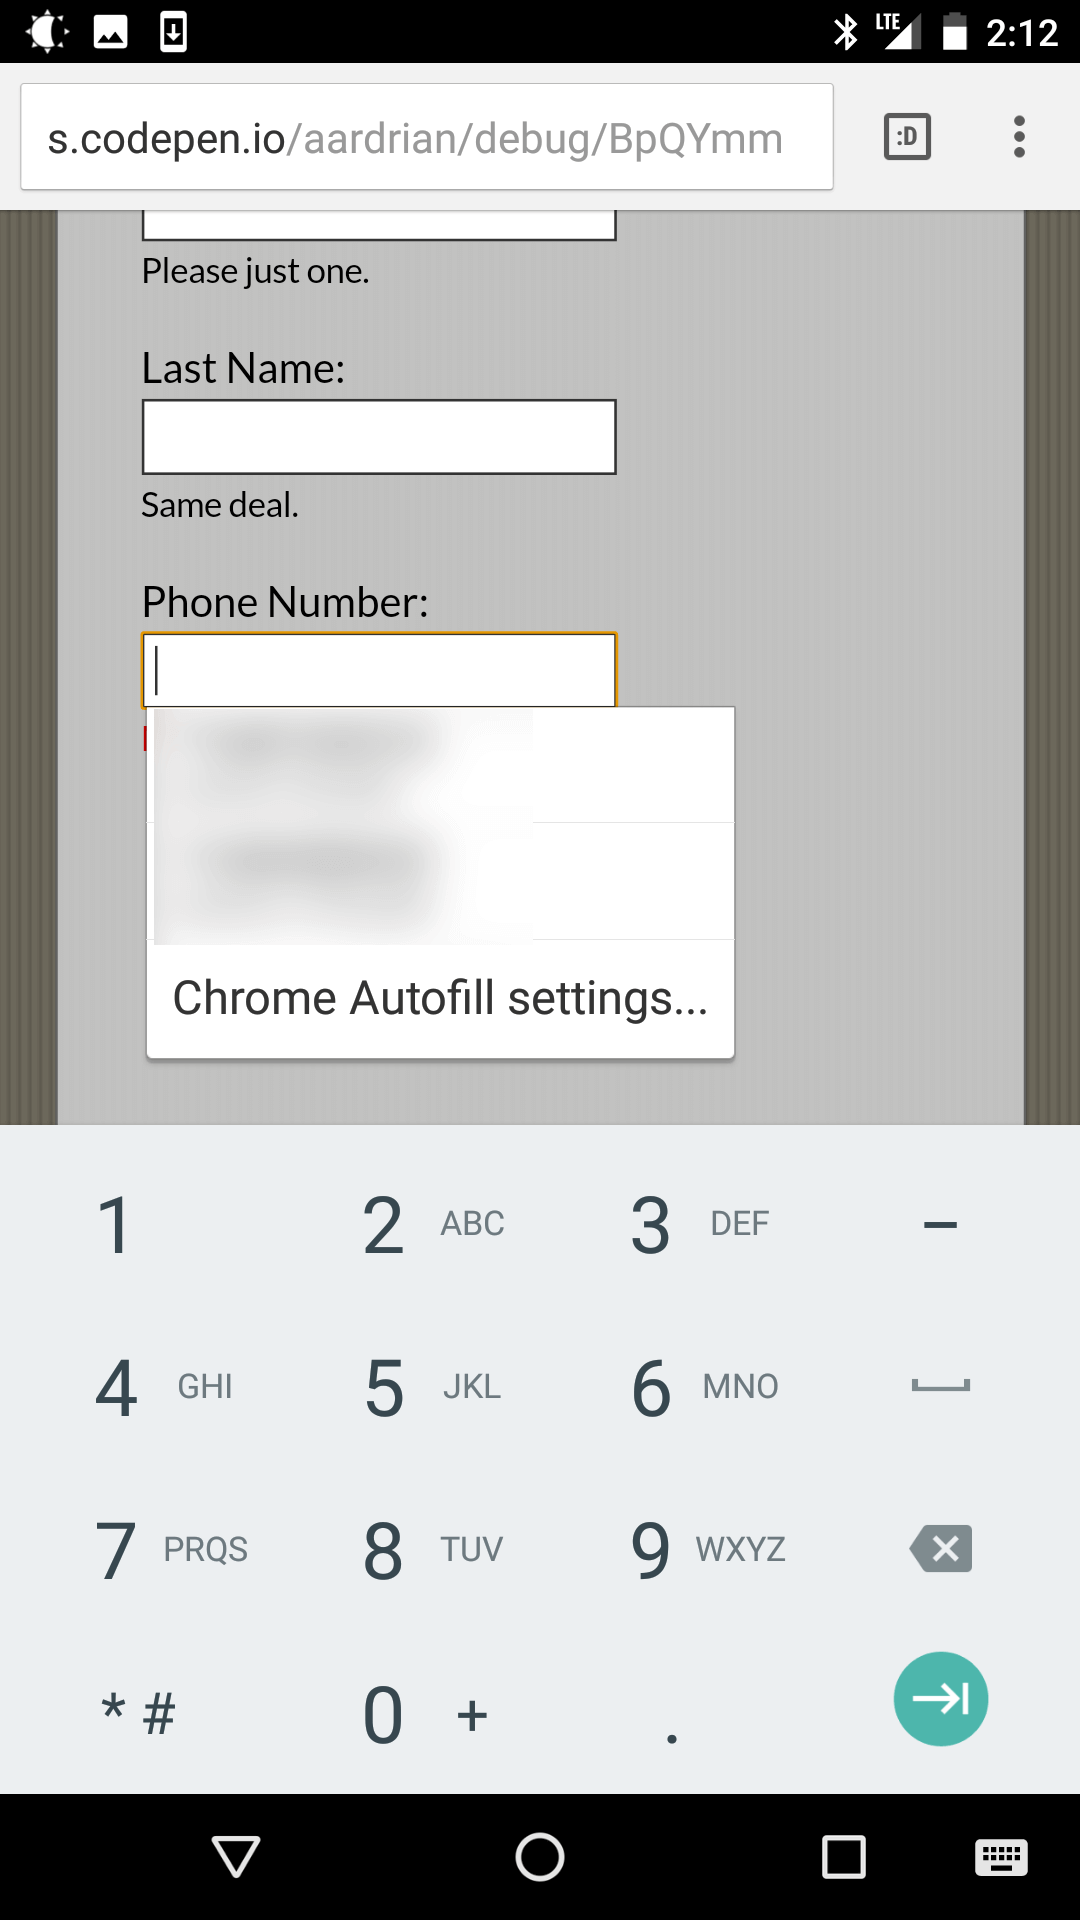 Screen shot from Chrome on Android showing auto-complete on the third field.